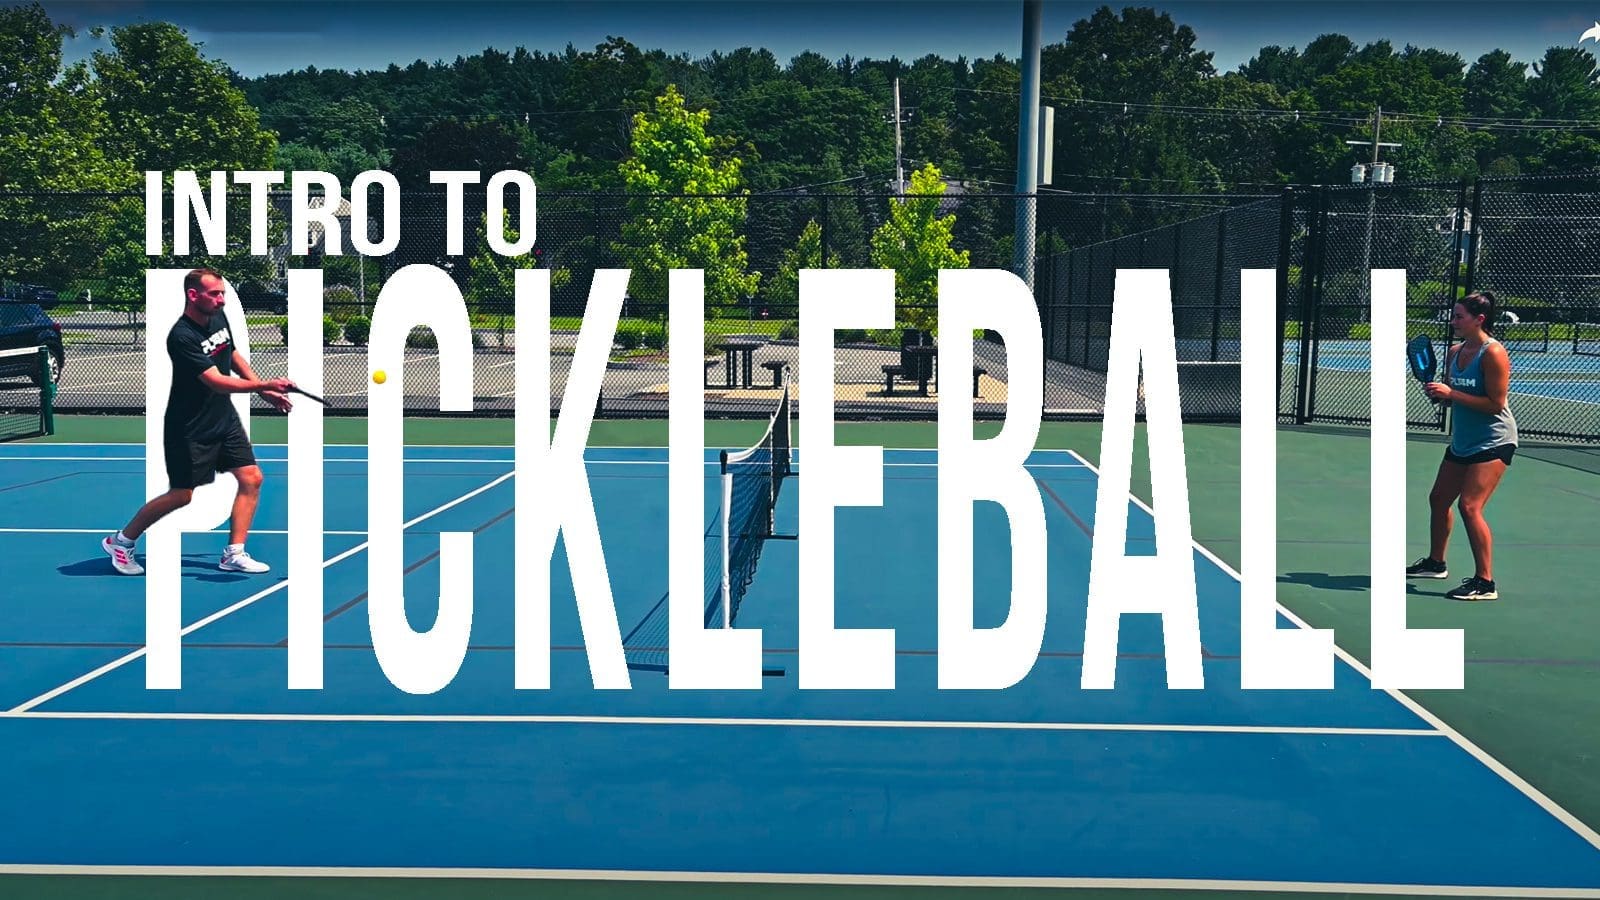 Cover photo for PLT4M's intro to pickleball program that offers pickleball drills for physical education.